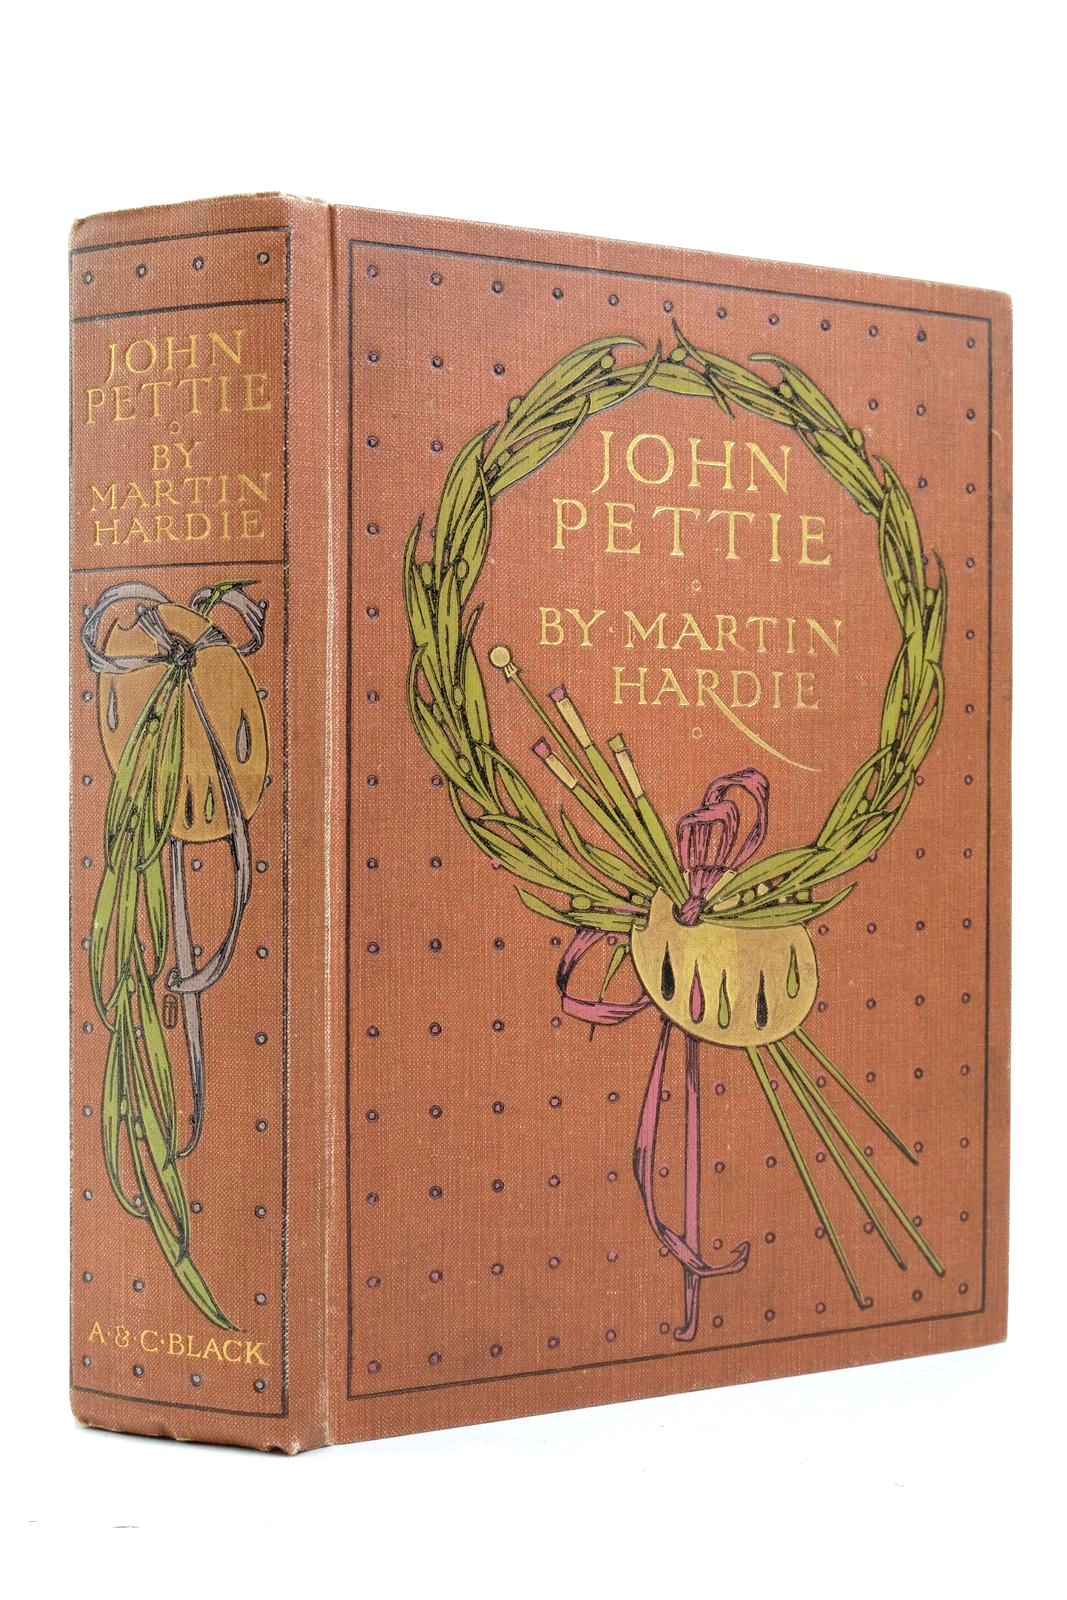 Photo of JOHN PETTIE written by Hardie, Martin illustrated by Pettie, John published by Adam &amp; Charles Black (STOCK CODE: 2137535)  for sale by Stella & Rose's Books